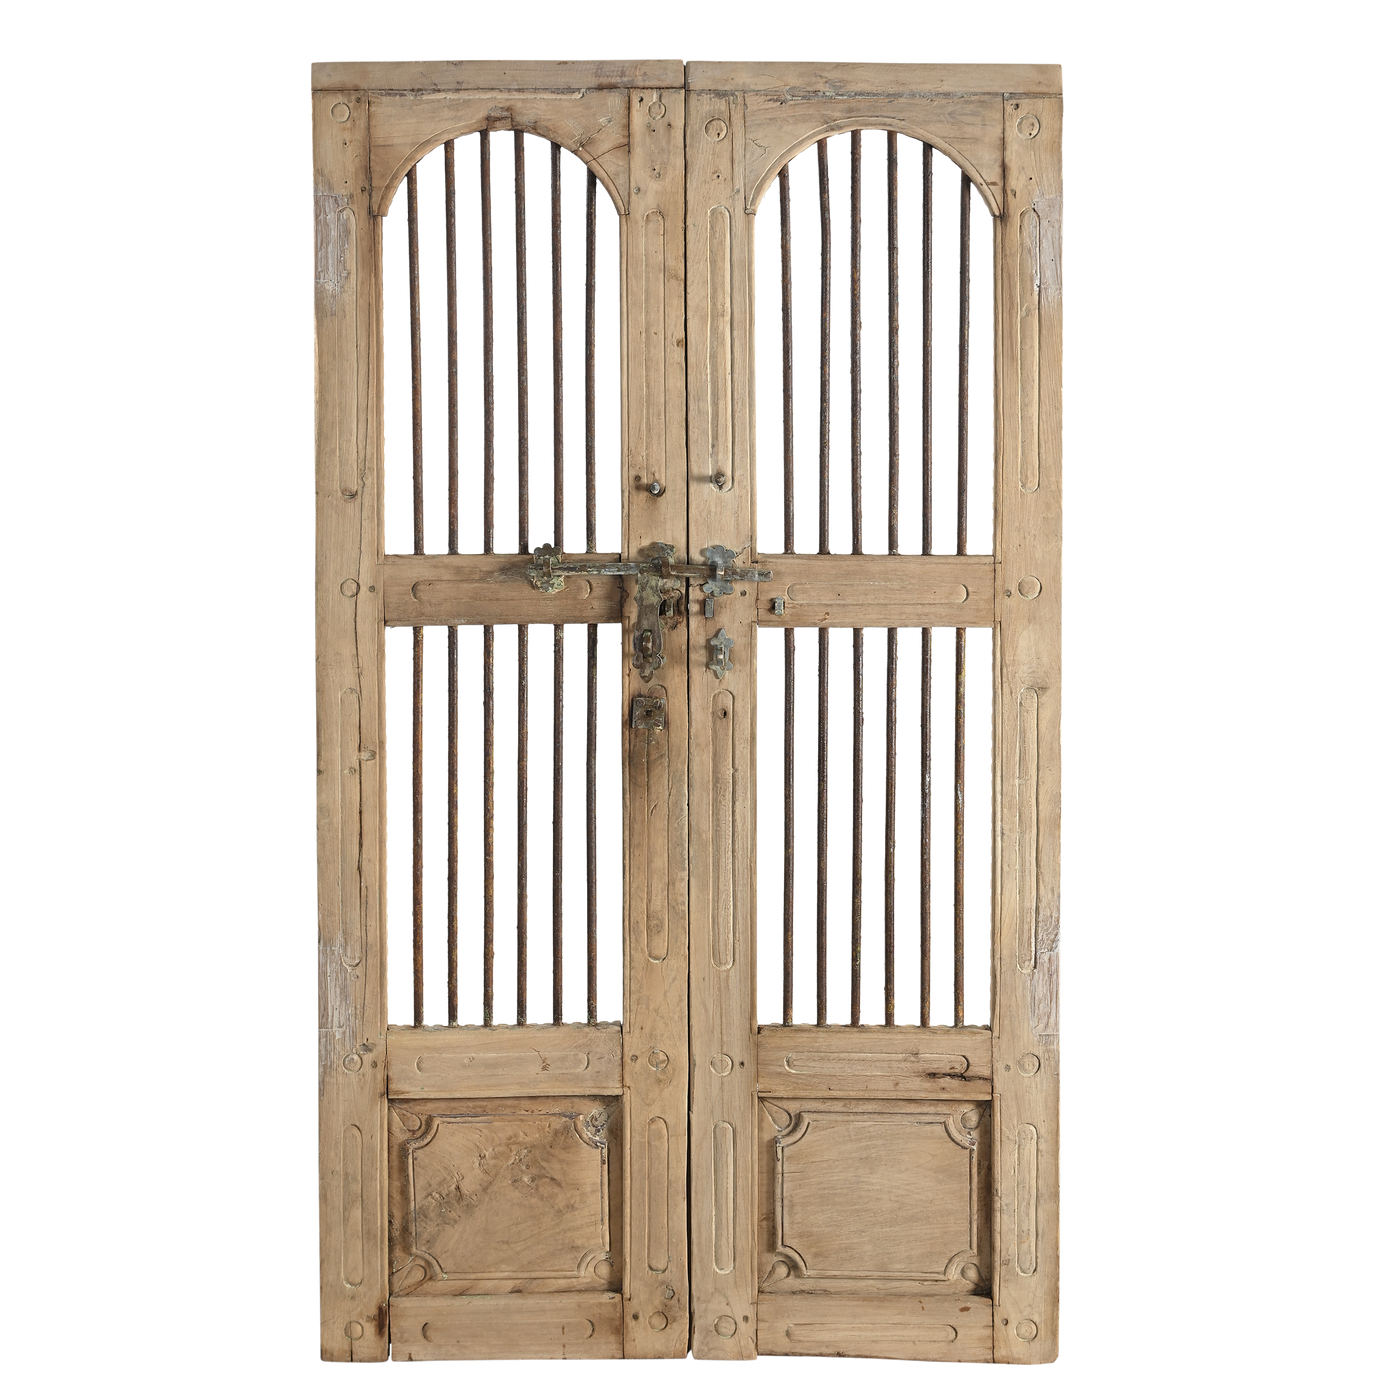 Sujasar - Carved Indian door with iron bars n°2